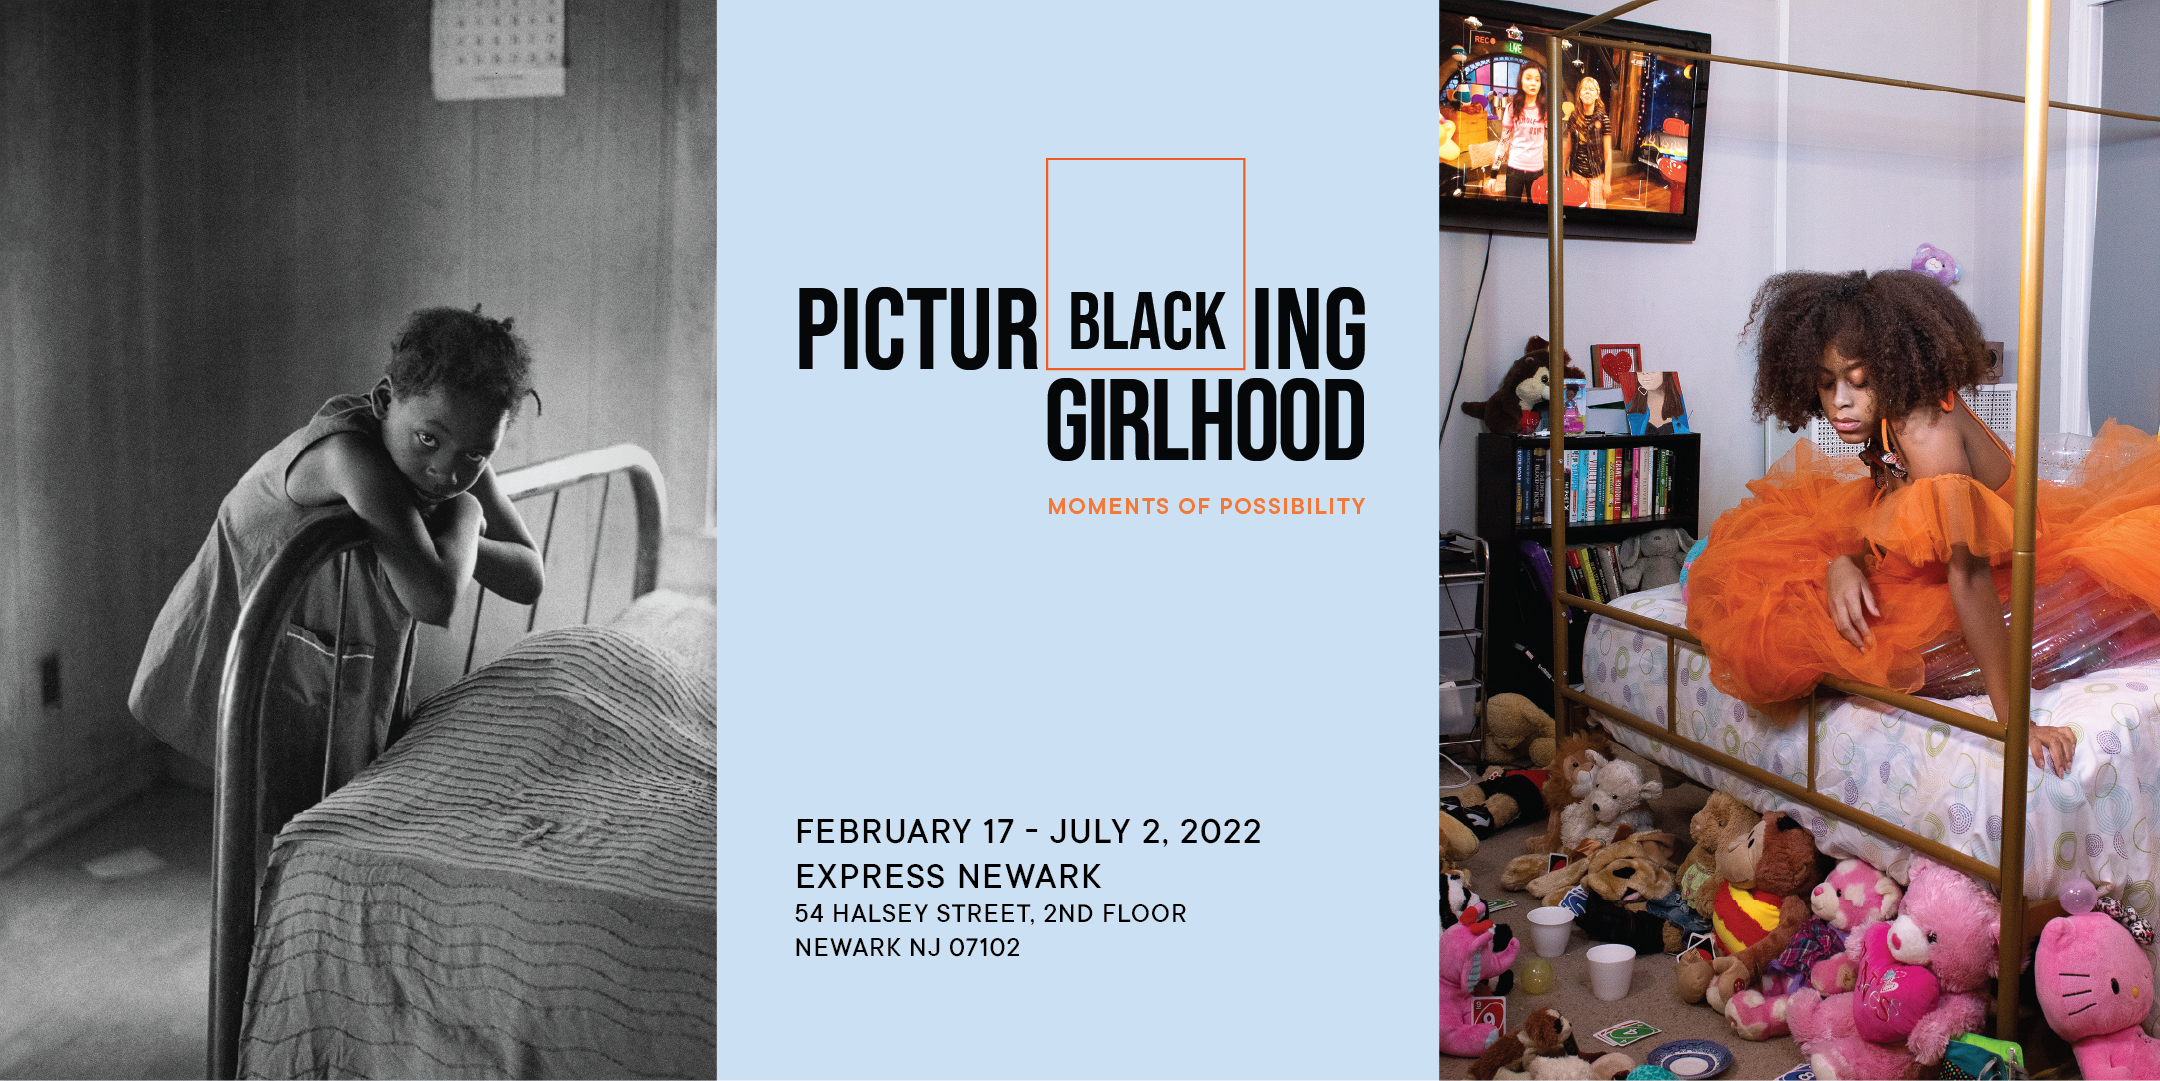 Picturing Black Girlhood: Moments of Possibility